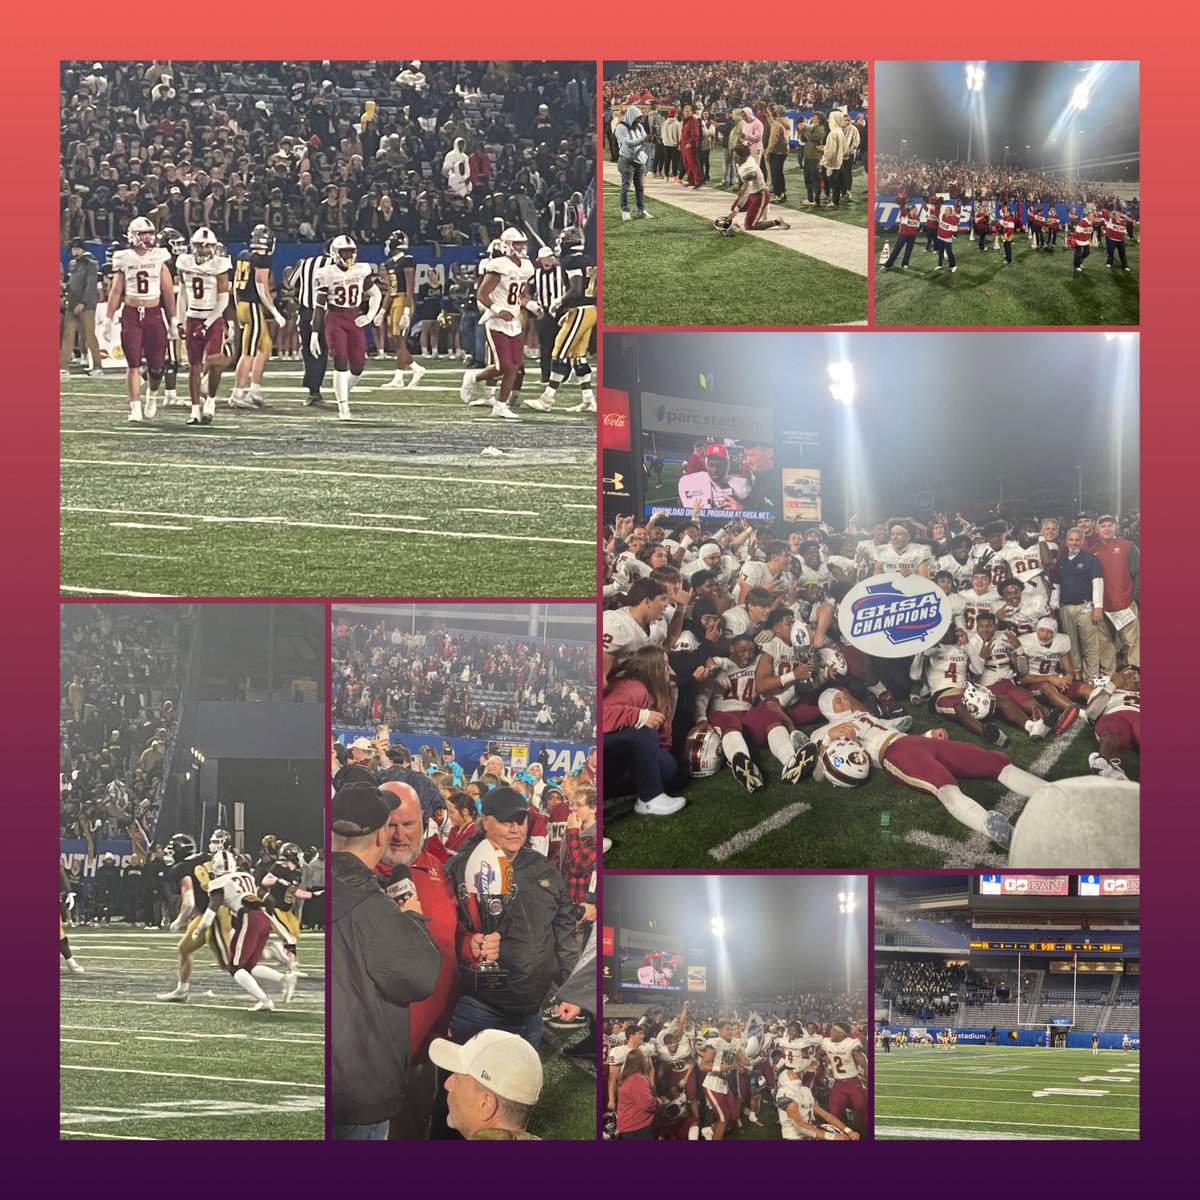 Congratulations to our 7A Georgia High School Football Champion Mill Creek Hawks for their 70-35 victory over the Carrollton Trojans! Kudos & congrats to Head Coach Josh Lovelady & Principal Jason Lane for creating a winning environment on the field & in the classroom. #TeamGCPS